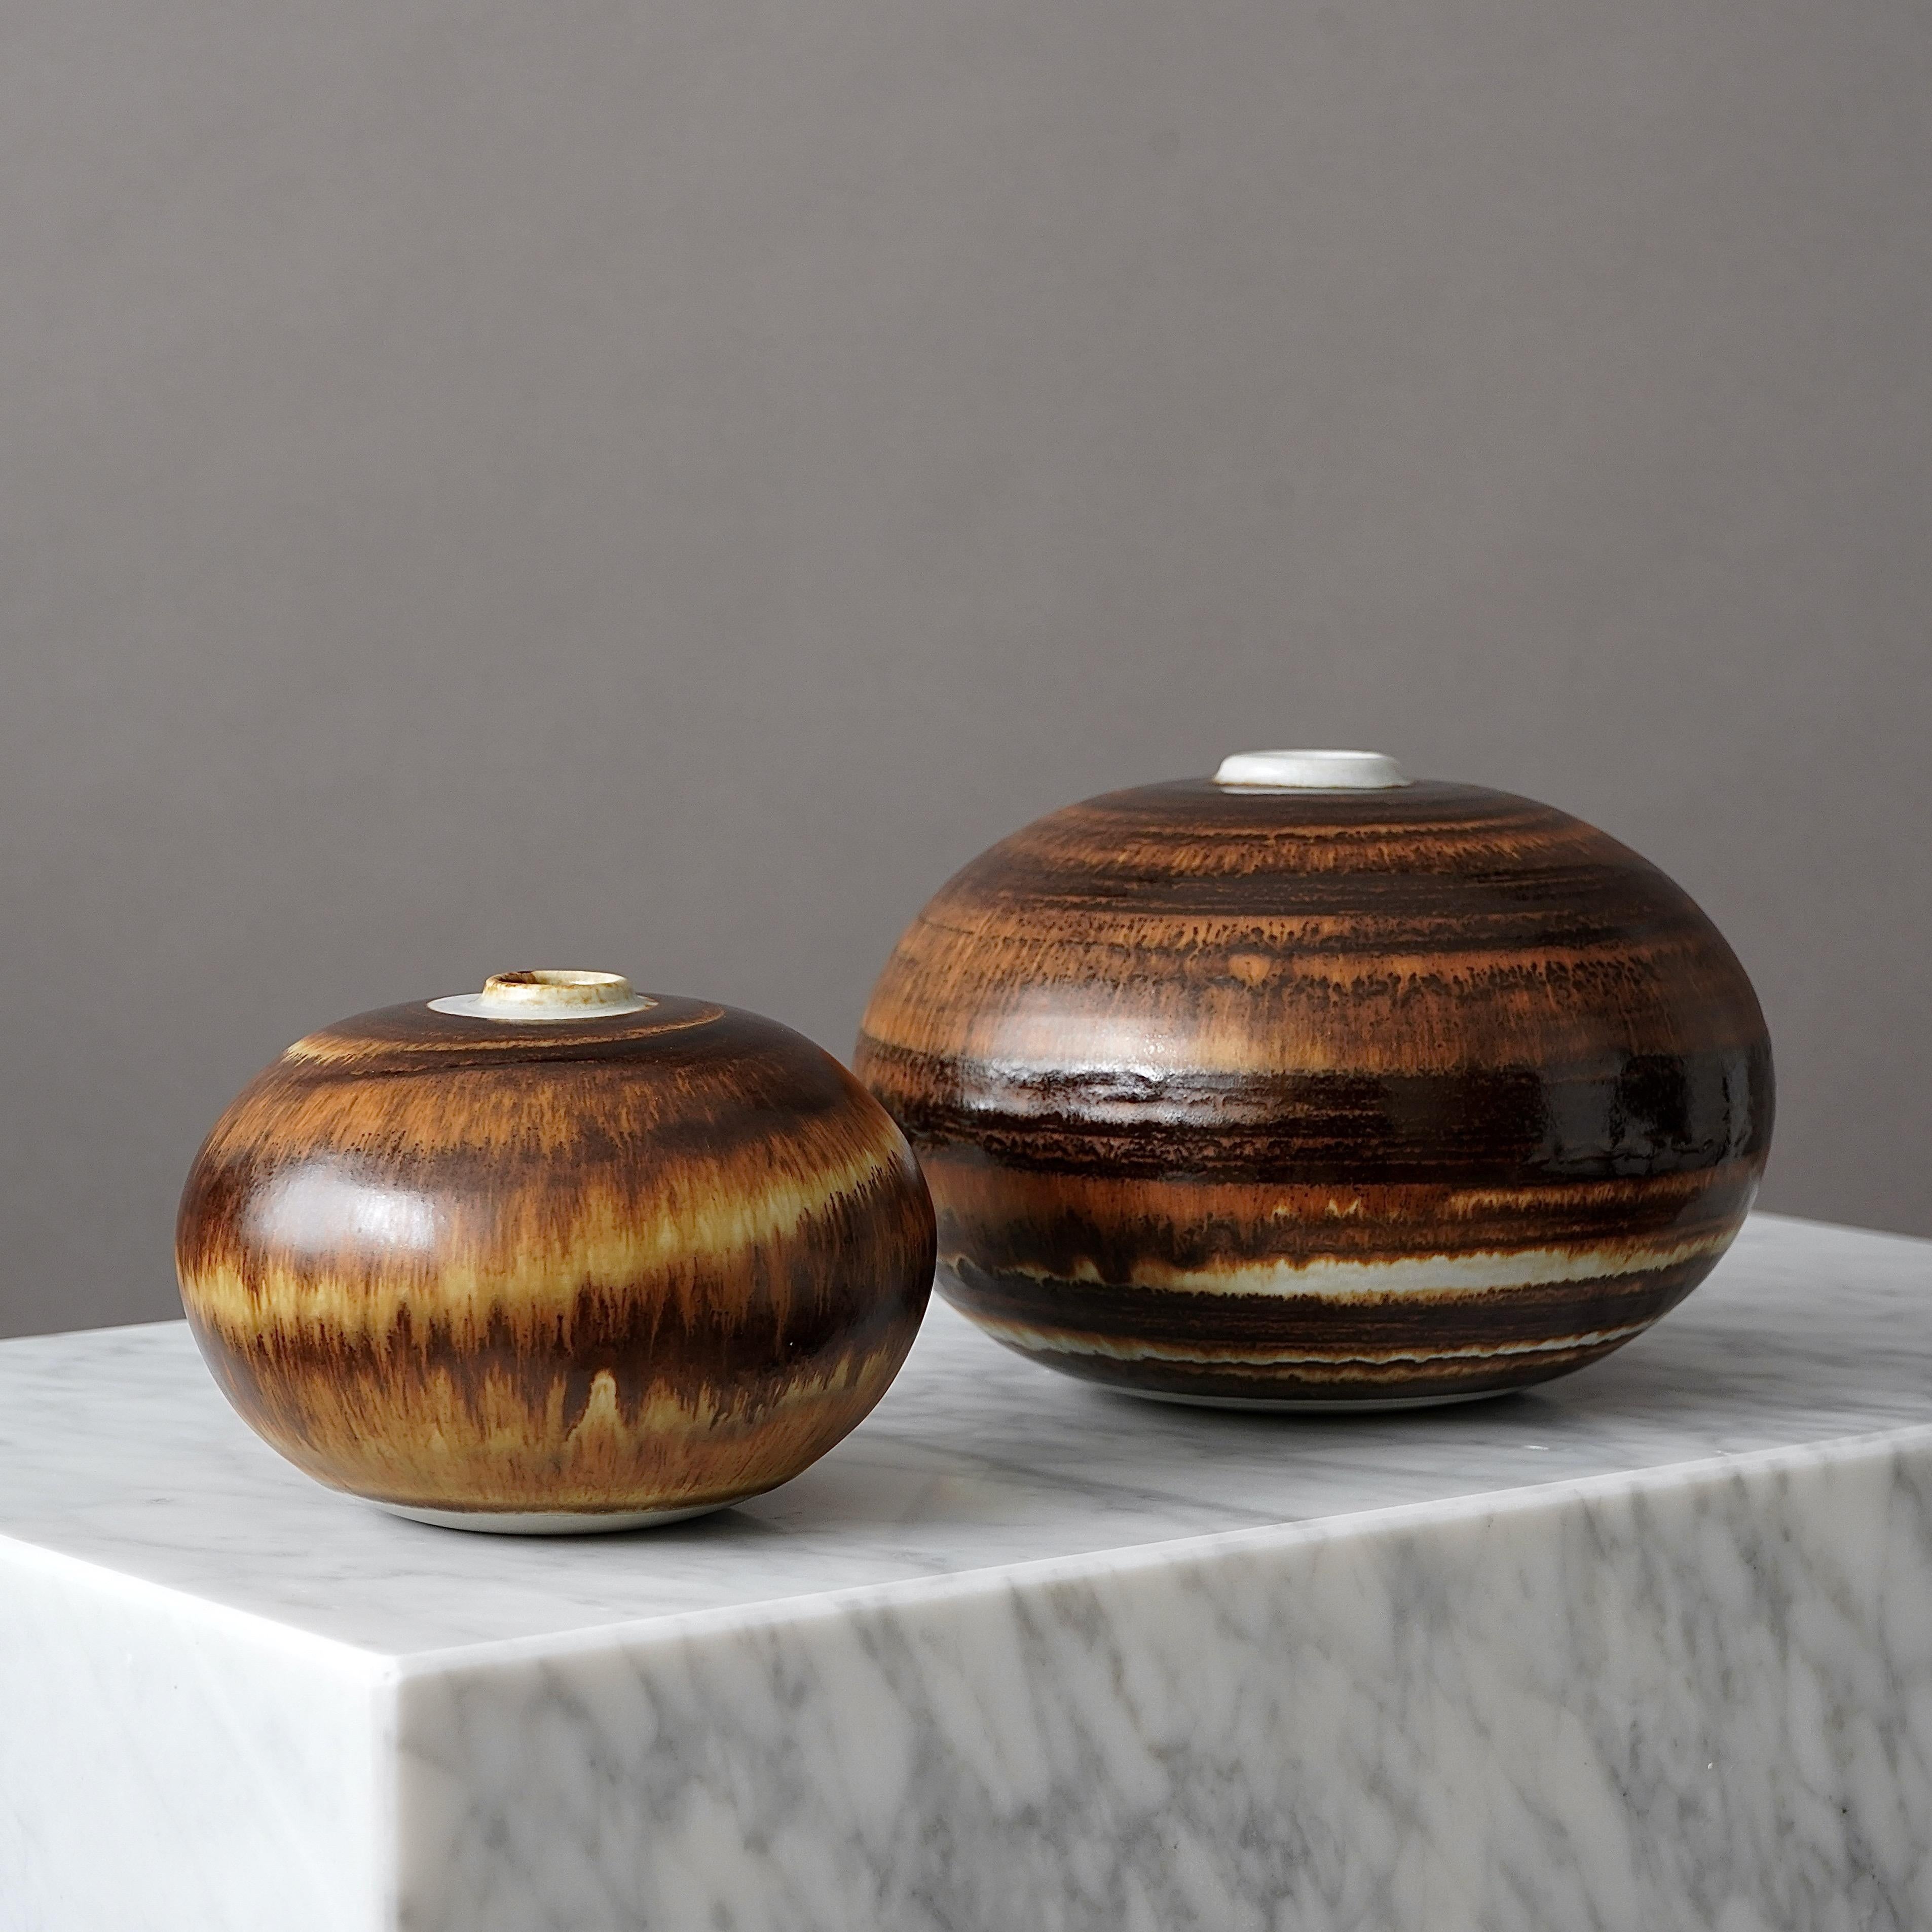 Turned A pair of Stoneware Vases by Andersson & Johansson, Höganäs, Sweden, 1977 For Sale